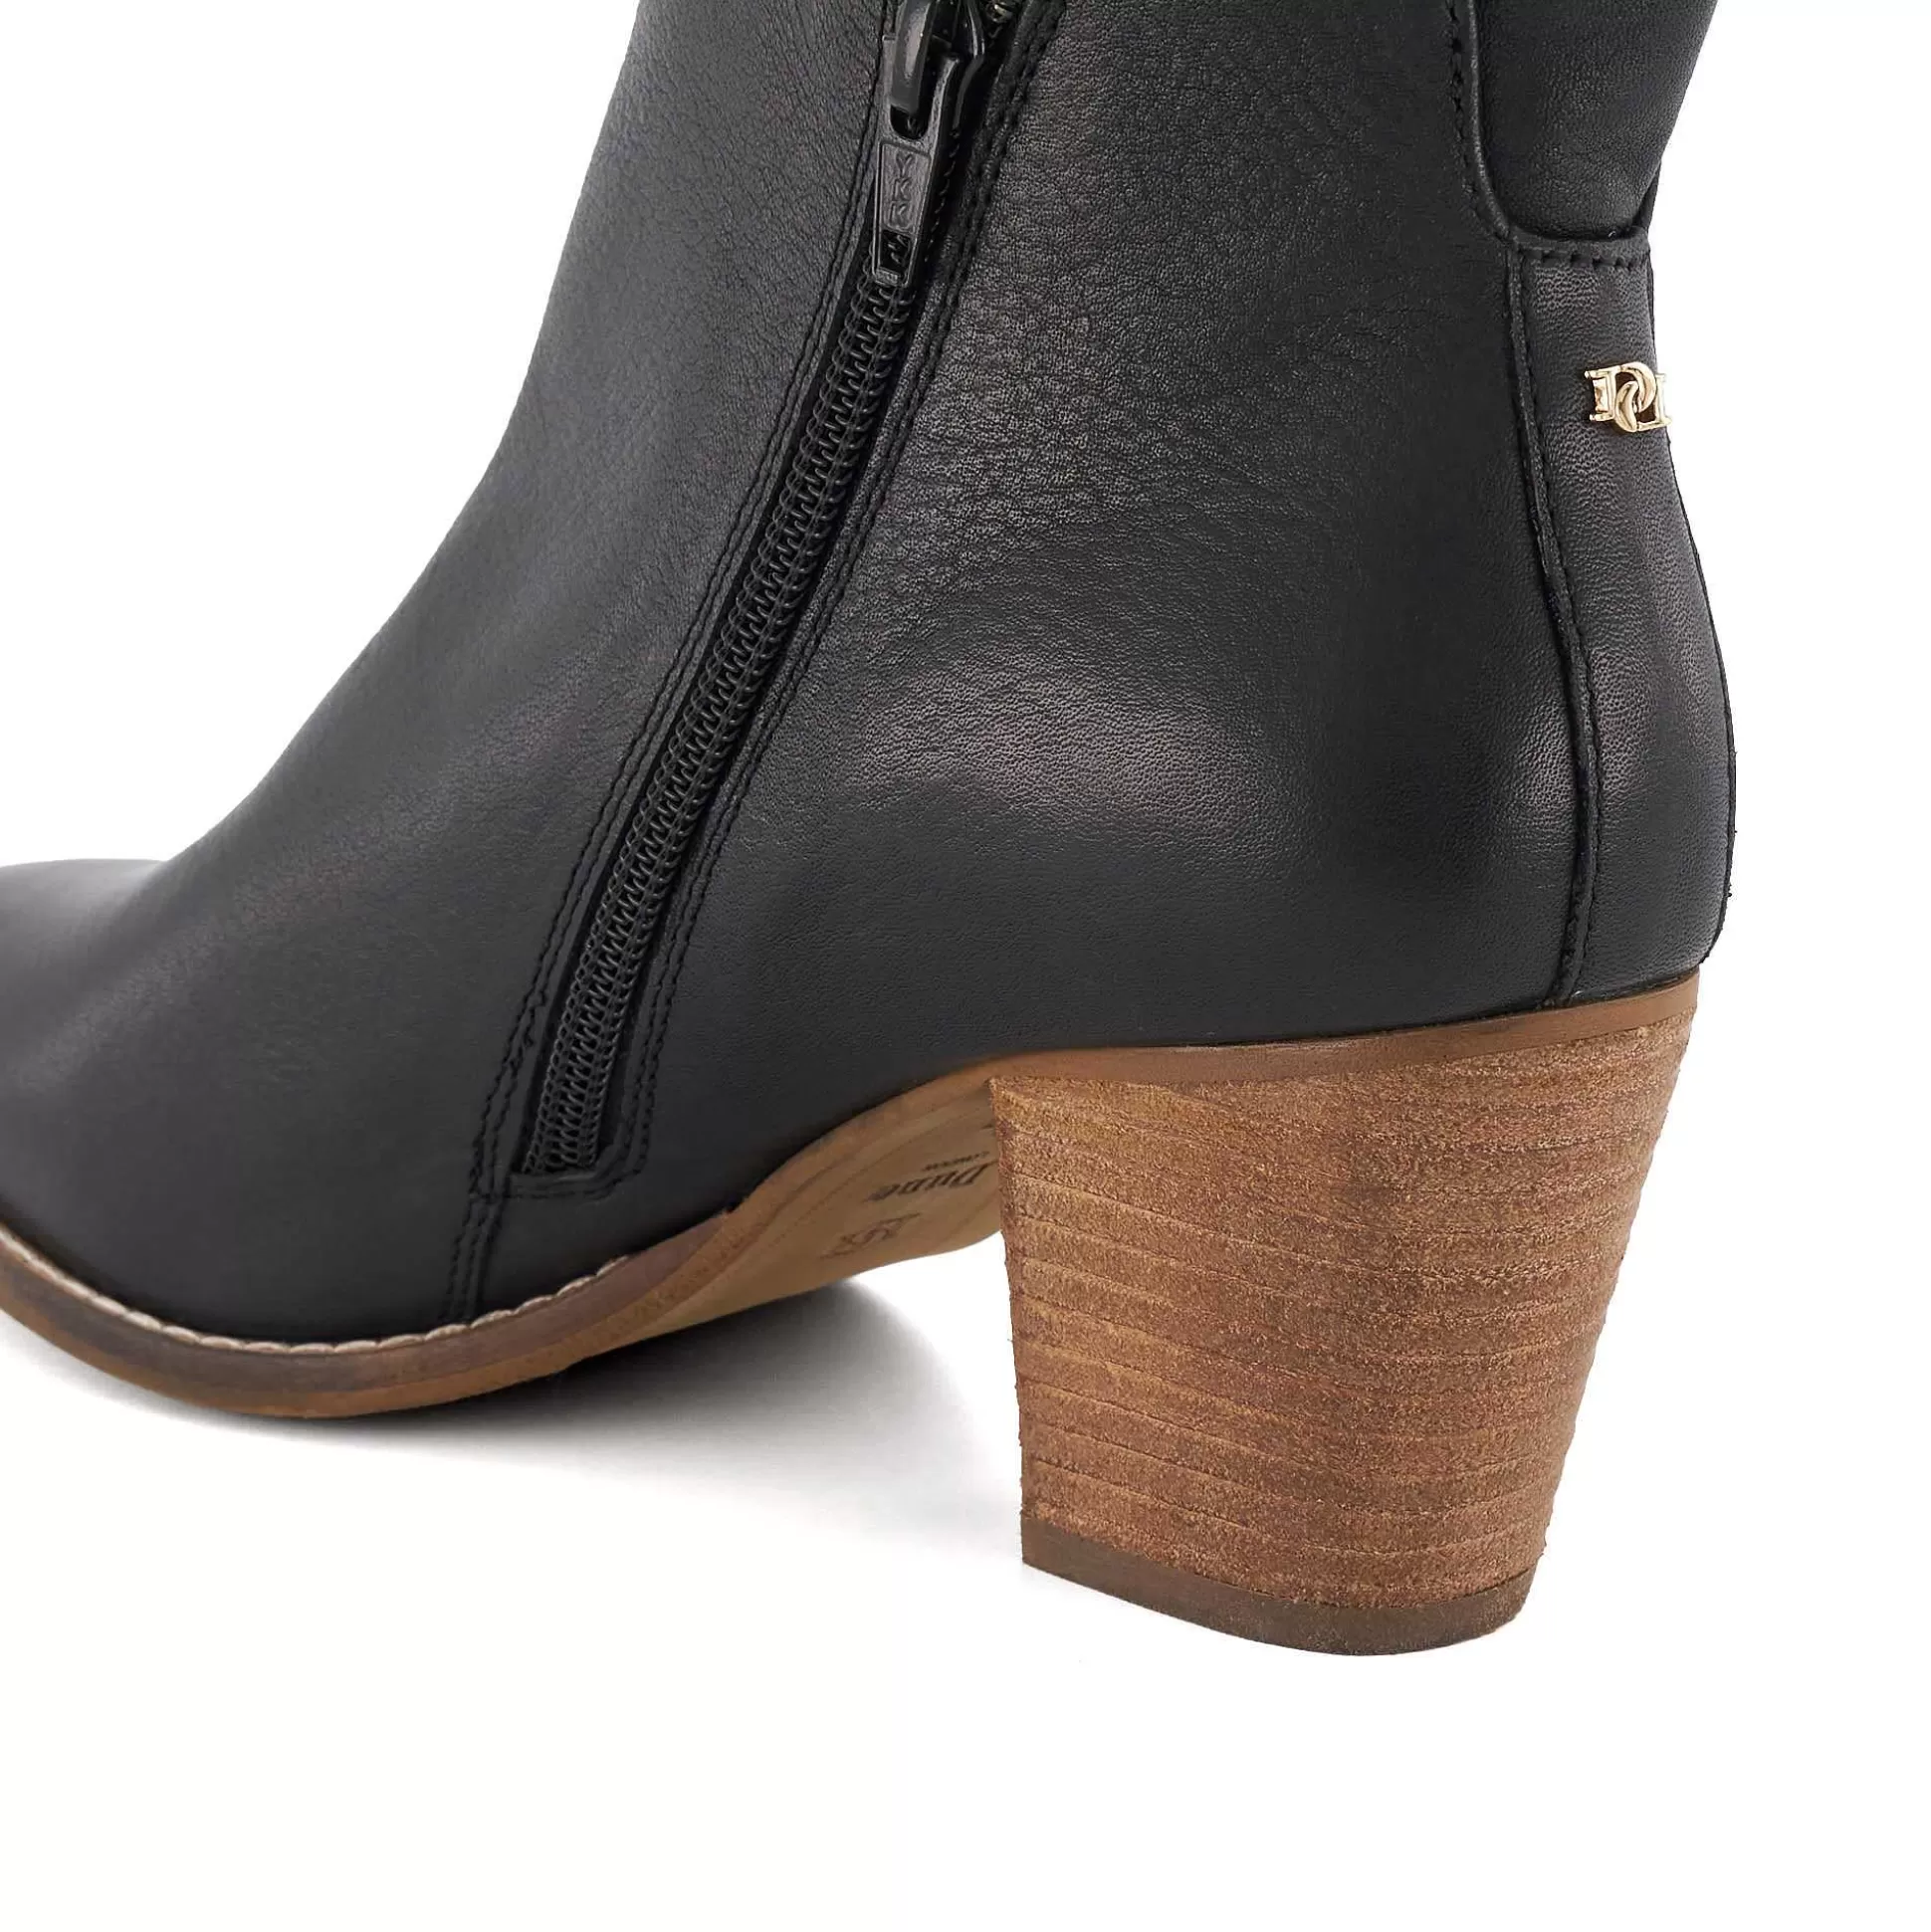 Dune London PAICEY - BLACK-Women Western Cowboy Boots | Ankle Boots